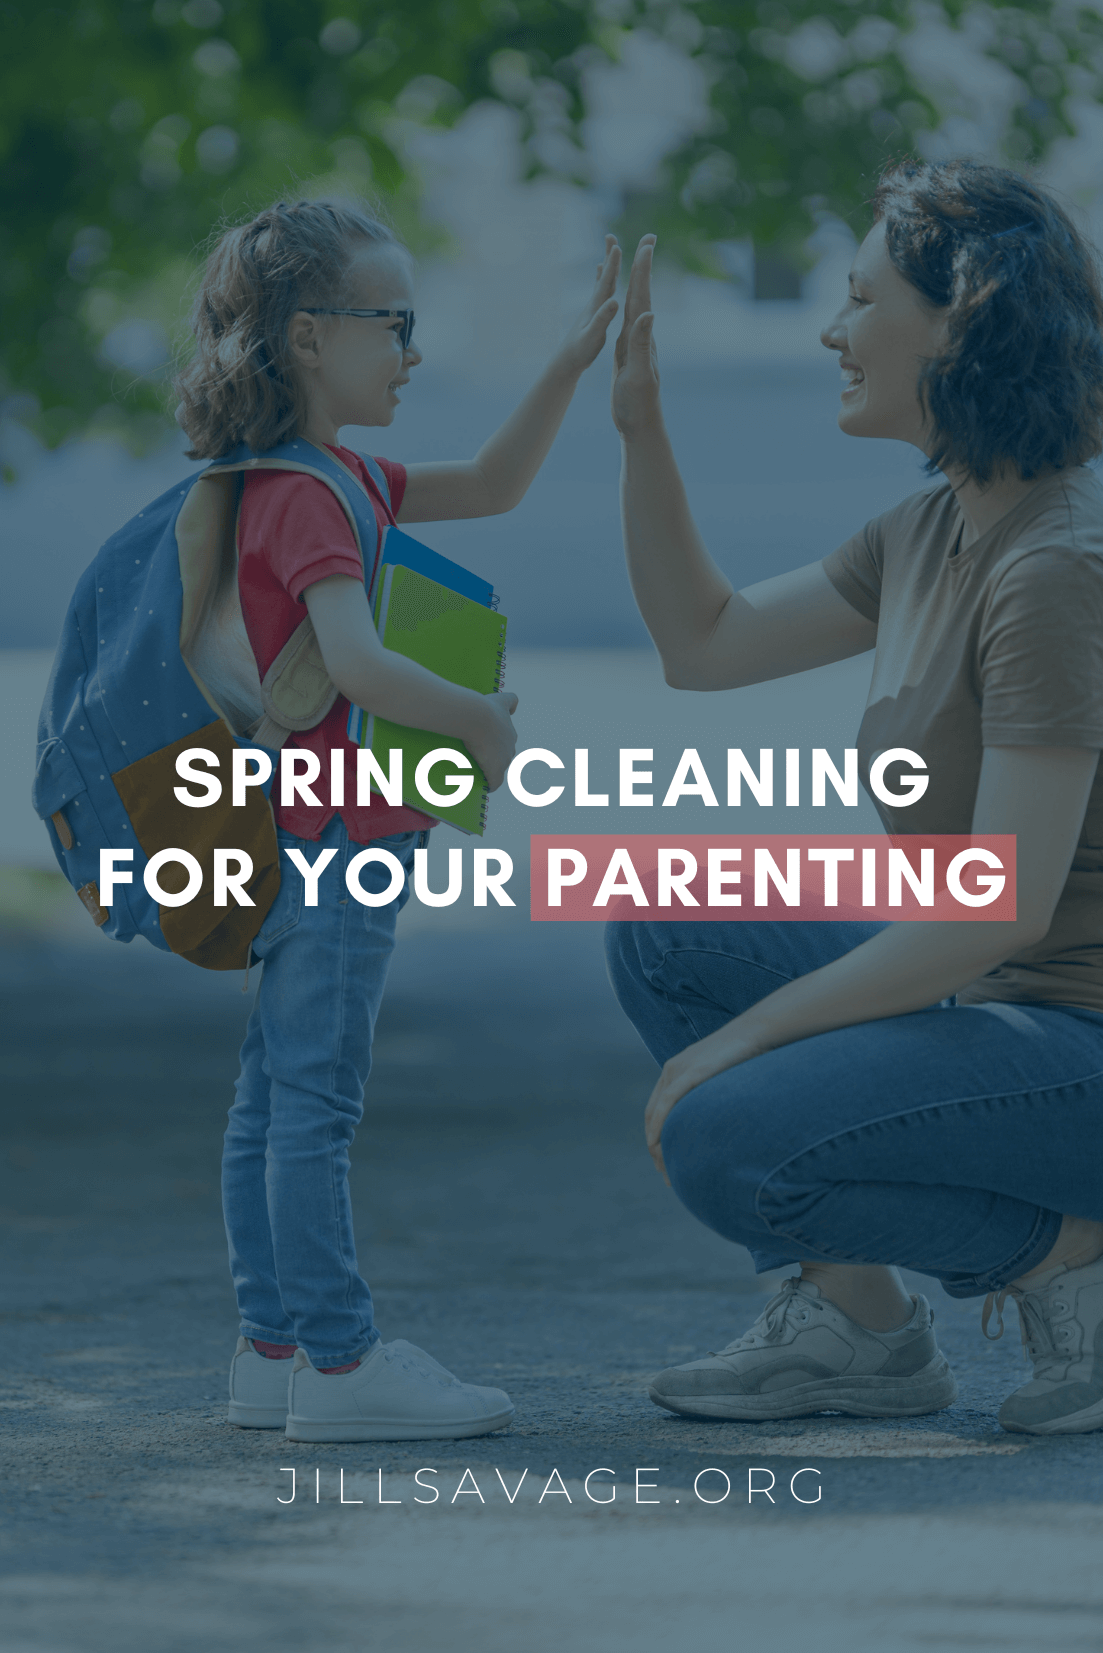 Spring Cleaning for Your Parenting